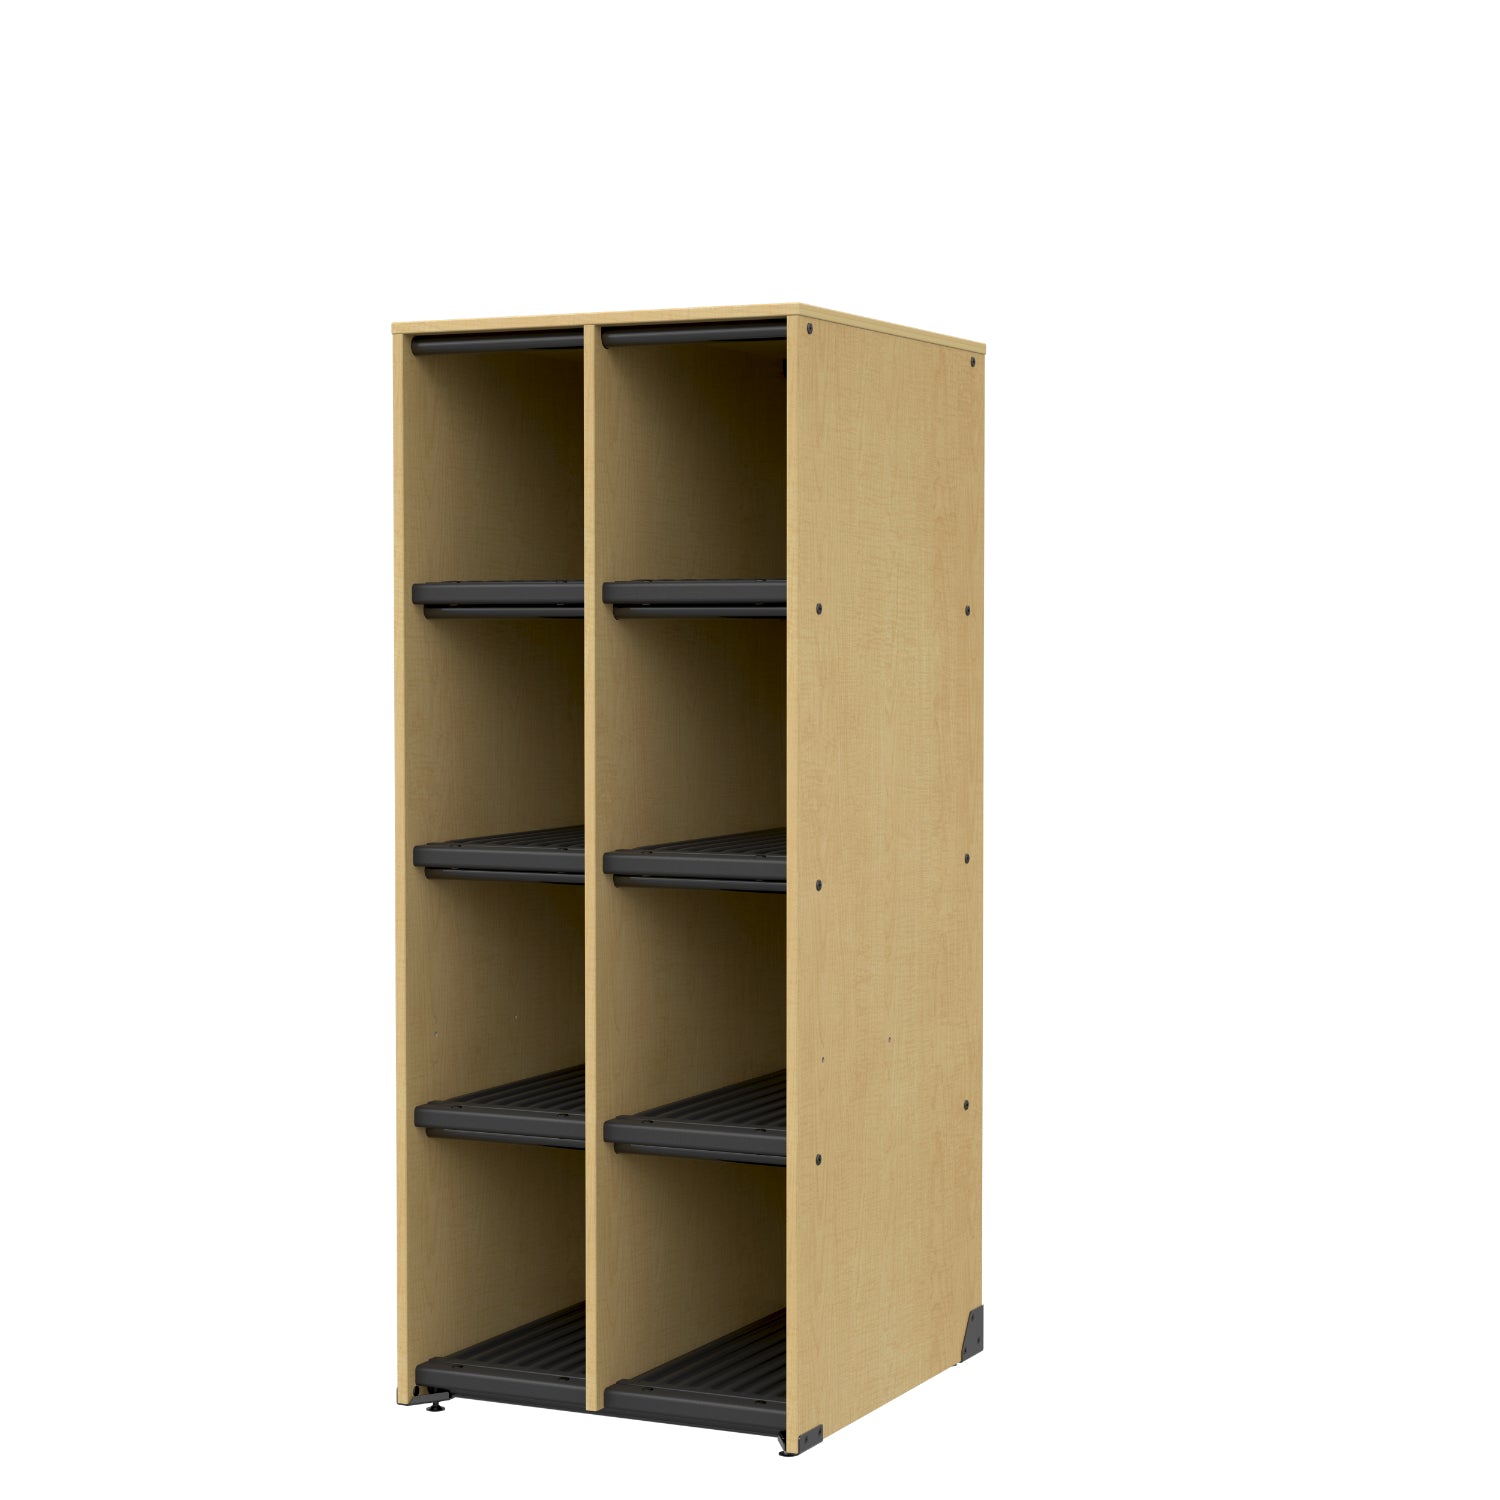 Bandstor™ 8 Compartment Woodwind/Brass Storage, 27.75"W x 68"H x 29.25"D